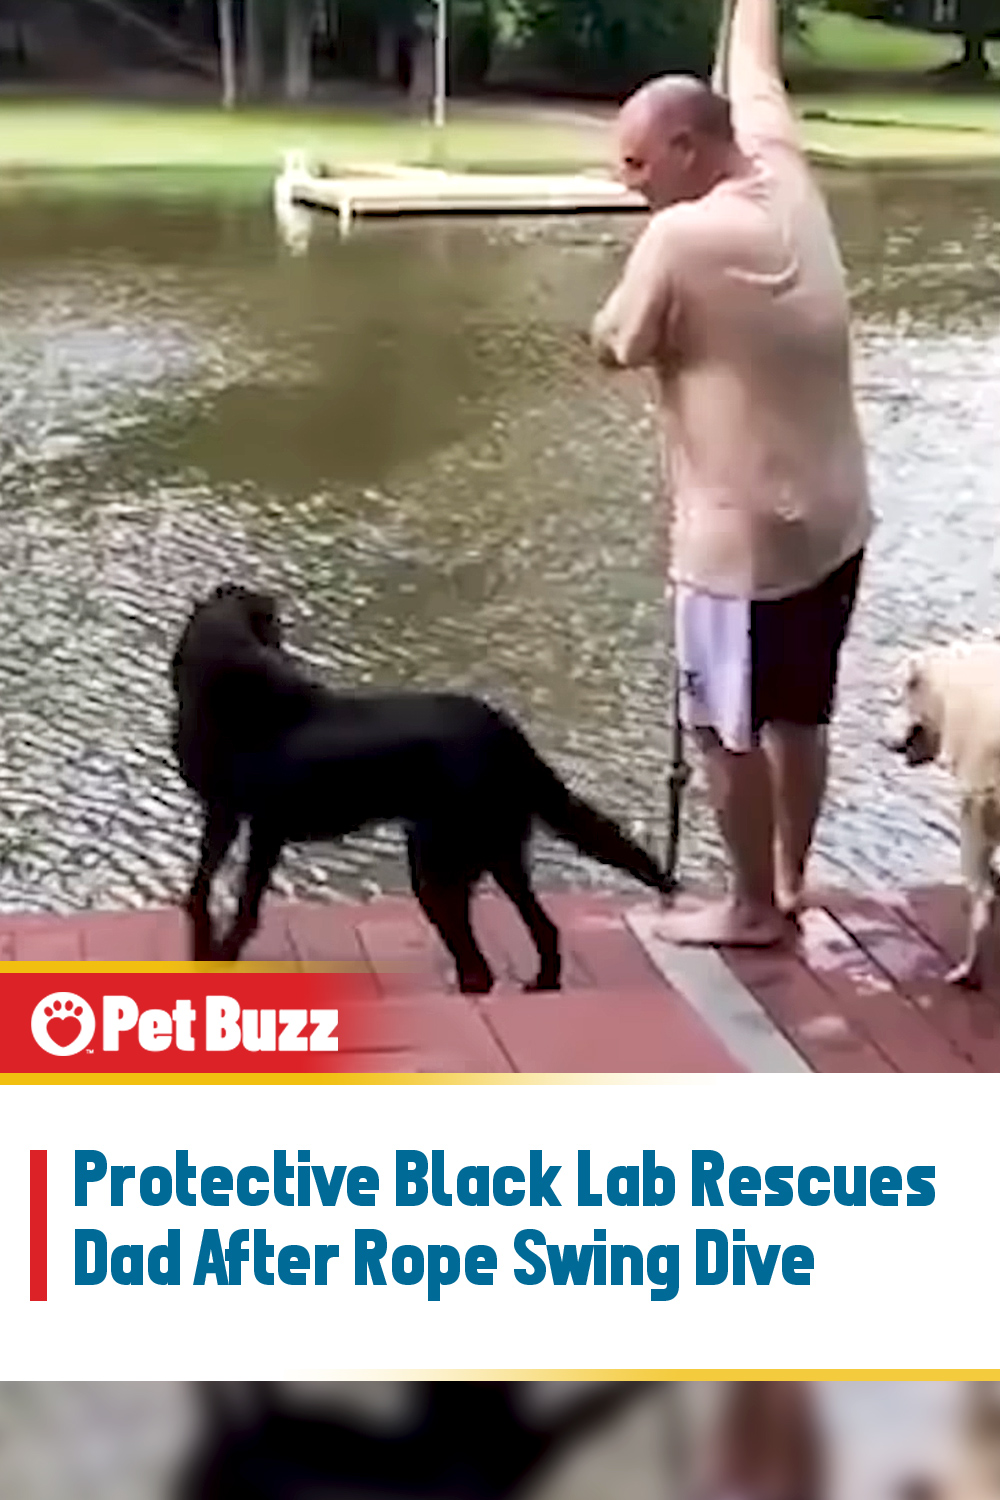 Protective Black Lab Rescues Dad After Rope Swing Dive